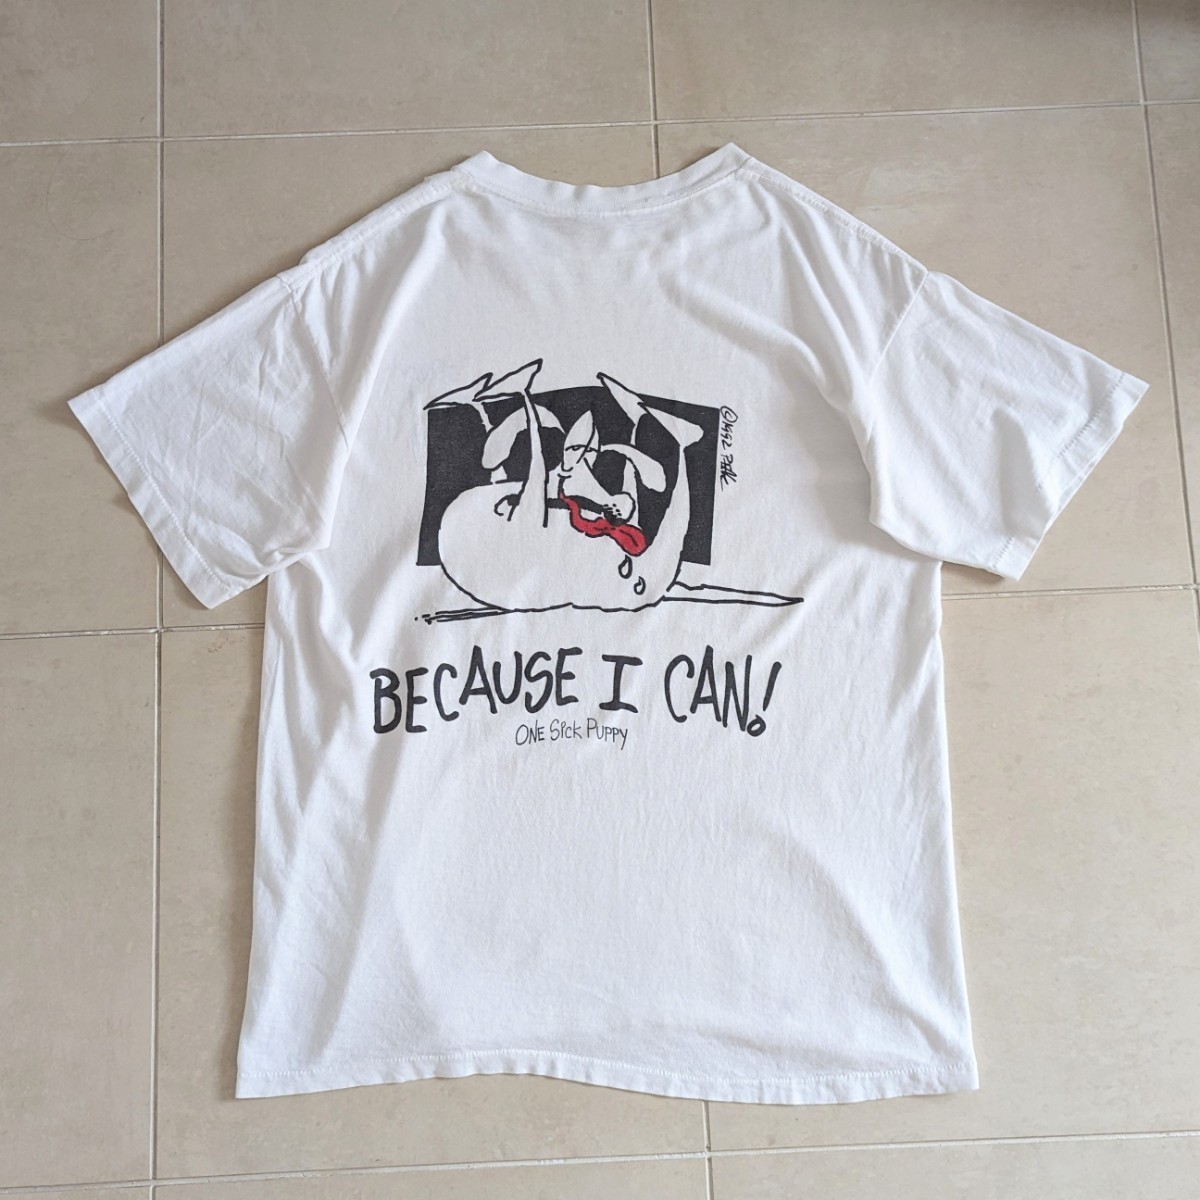 90s USA製 One Sick Puppy ドッグ　エロ Tシャツ　L　ヴィンテージ　スヌーピー　アート　偉人　シングルステッチ_画像1